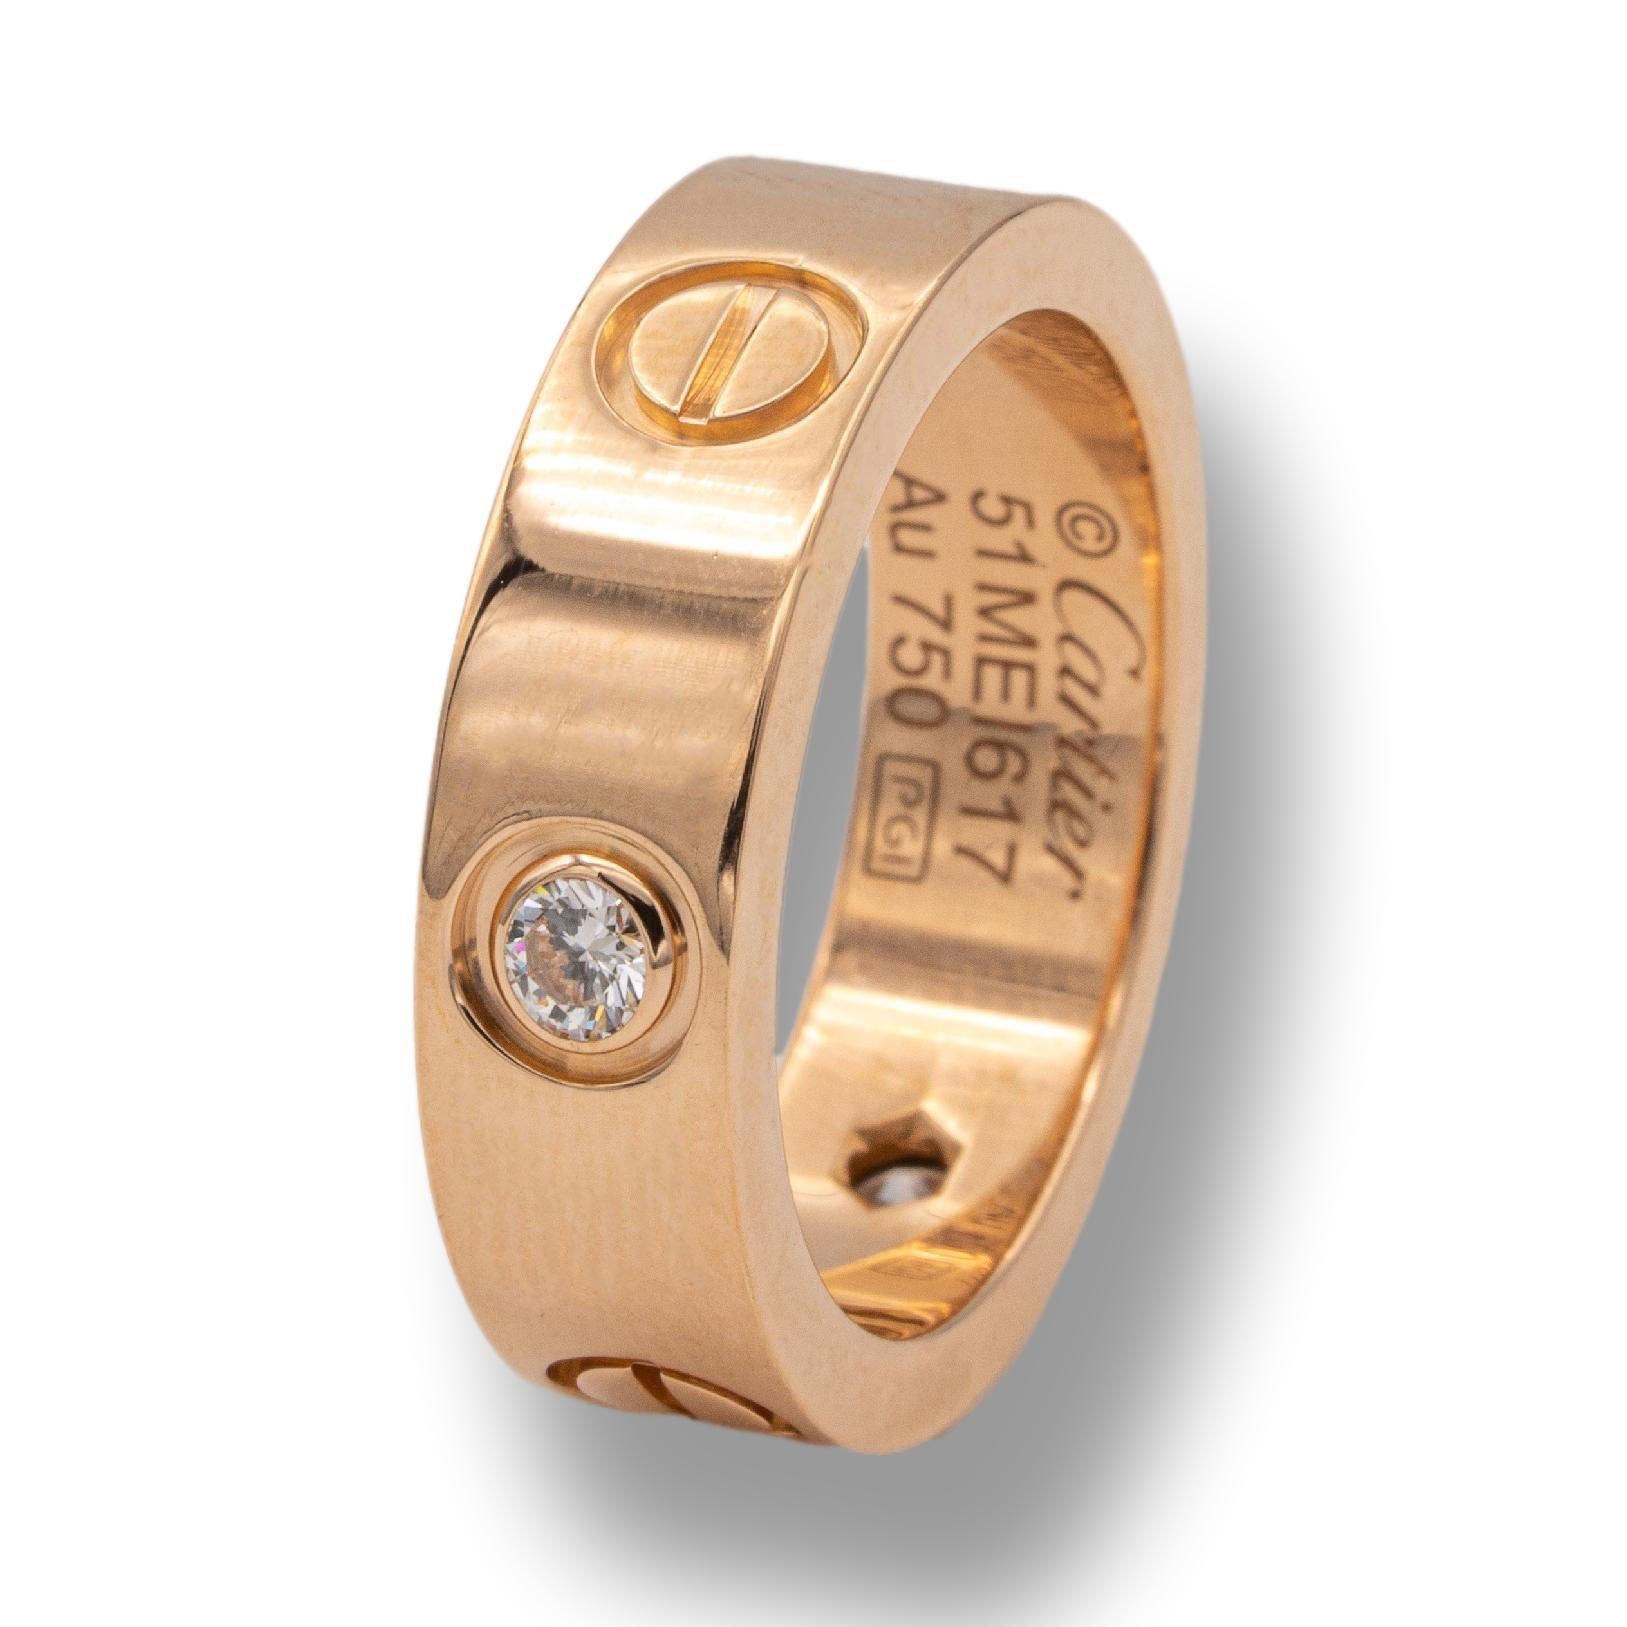 Cartier ring from the LOVE collection finely crafted in 18 karat rose gold with 3 round brilliant cut diamonds weighing 0.22 cts. Includes Certificate of Authenticity. Ring is fully hallmarked.

Brand: Cartier

Hallmarks: © Cartier  51 MEI617

3